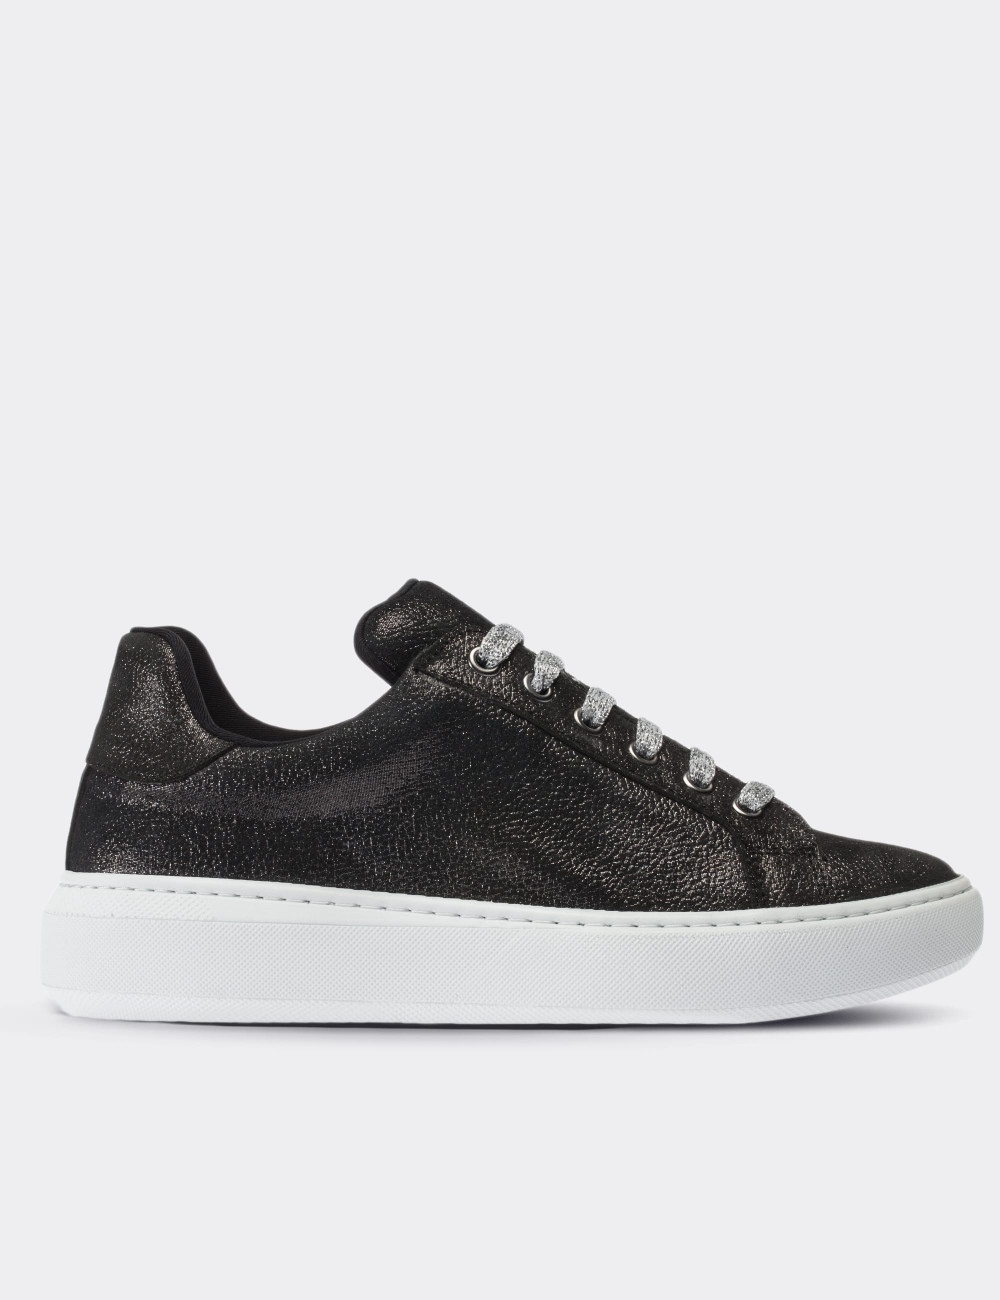 Black Suede Leather Sneakers - 01698ZSYHP02